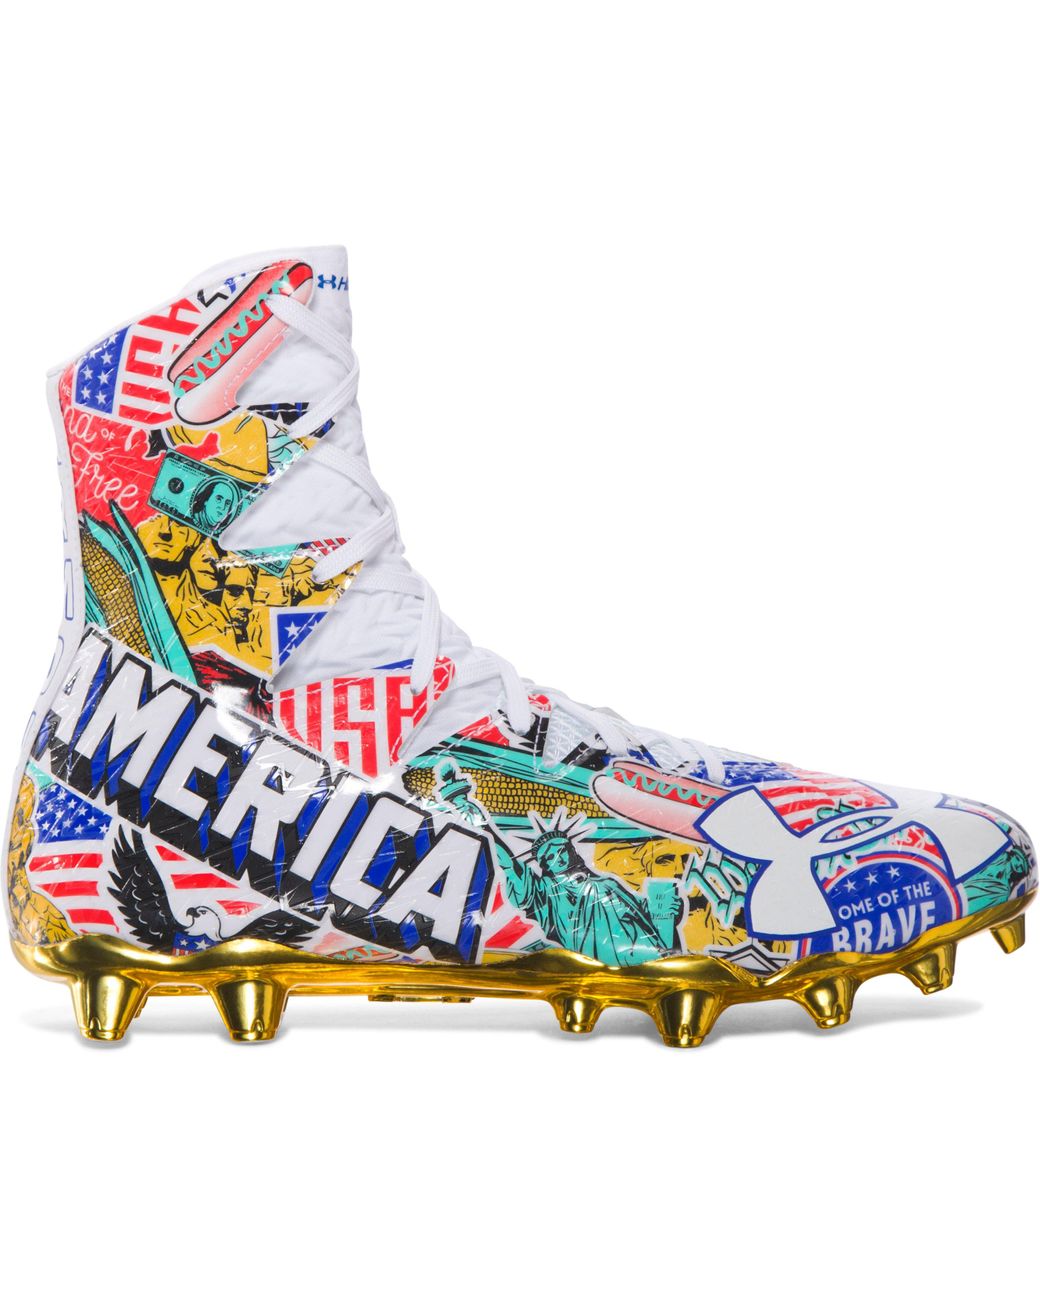 Under Armour Highlight Limited Edition USA Men's Football Cleats Multiple Sizes 